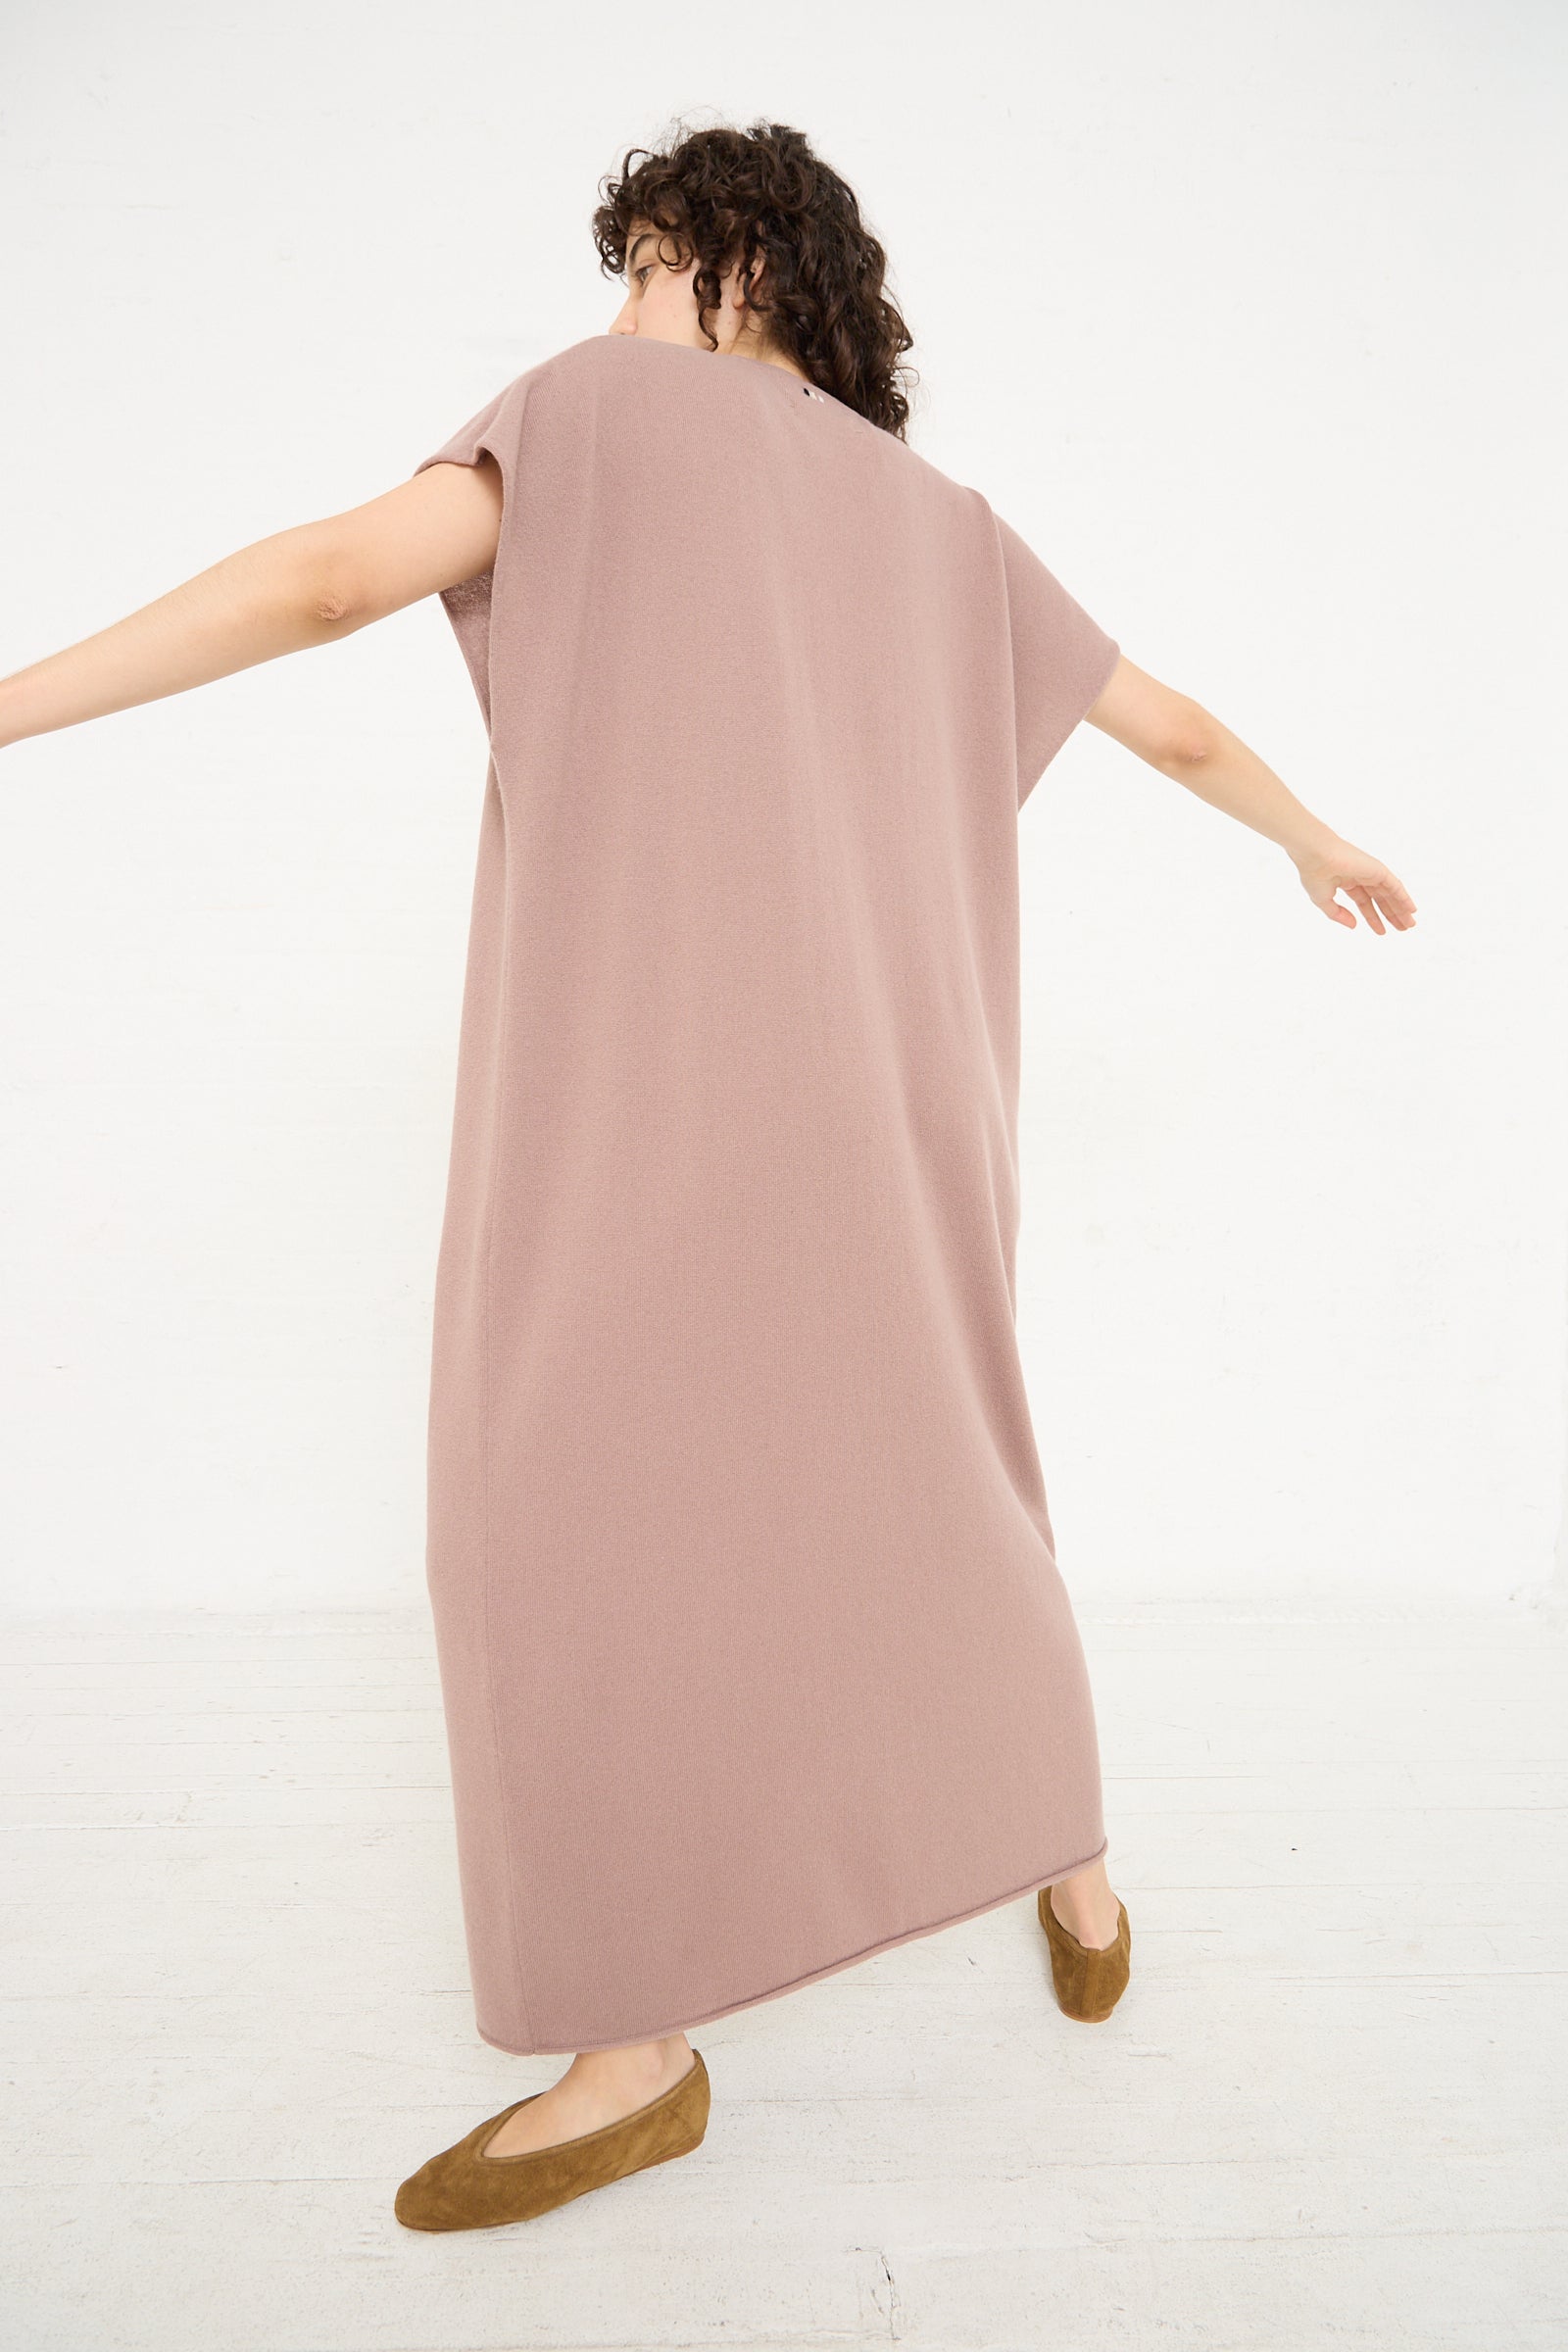 A woman in a pink No. 169 Healing Dress in Clay by Extreme Cashmere with her arms outstretched.